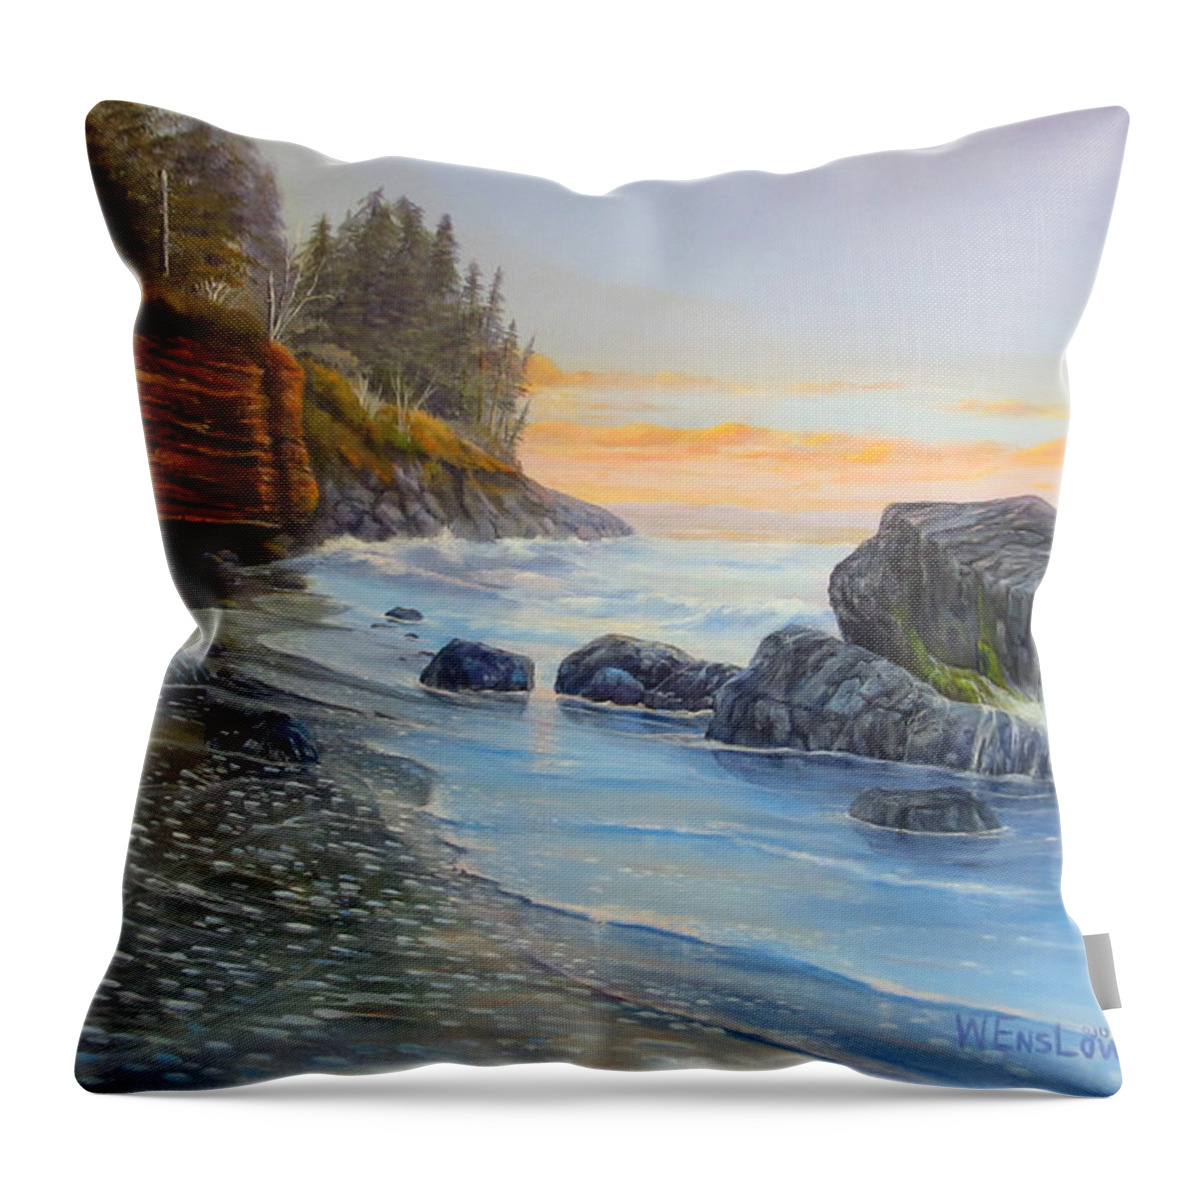 Seascape Throw Pillow featuring the painting Sunset Mystic Beach by Wayne Enslow